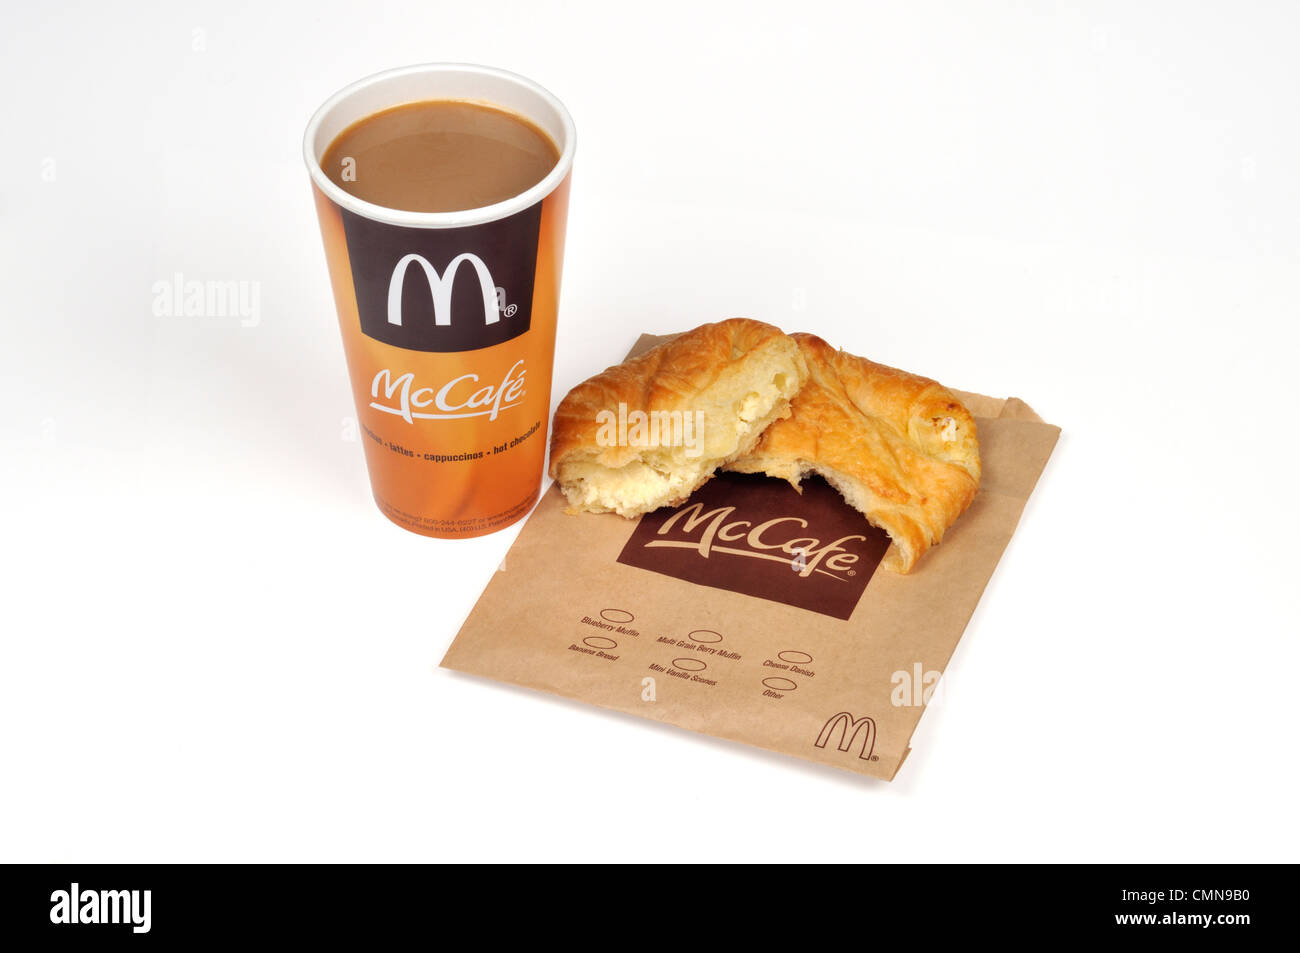 McDonald's cup of McCafe  coffee and cheese danish pastry on white background cut out USA. Stock Photo